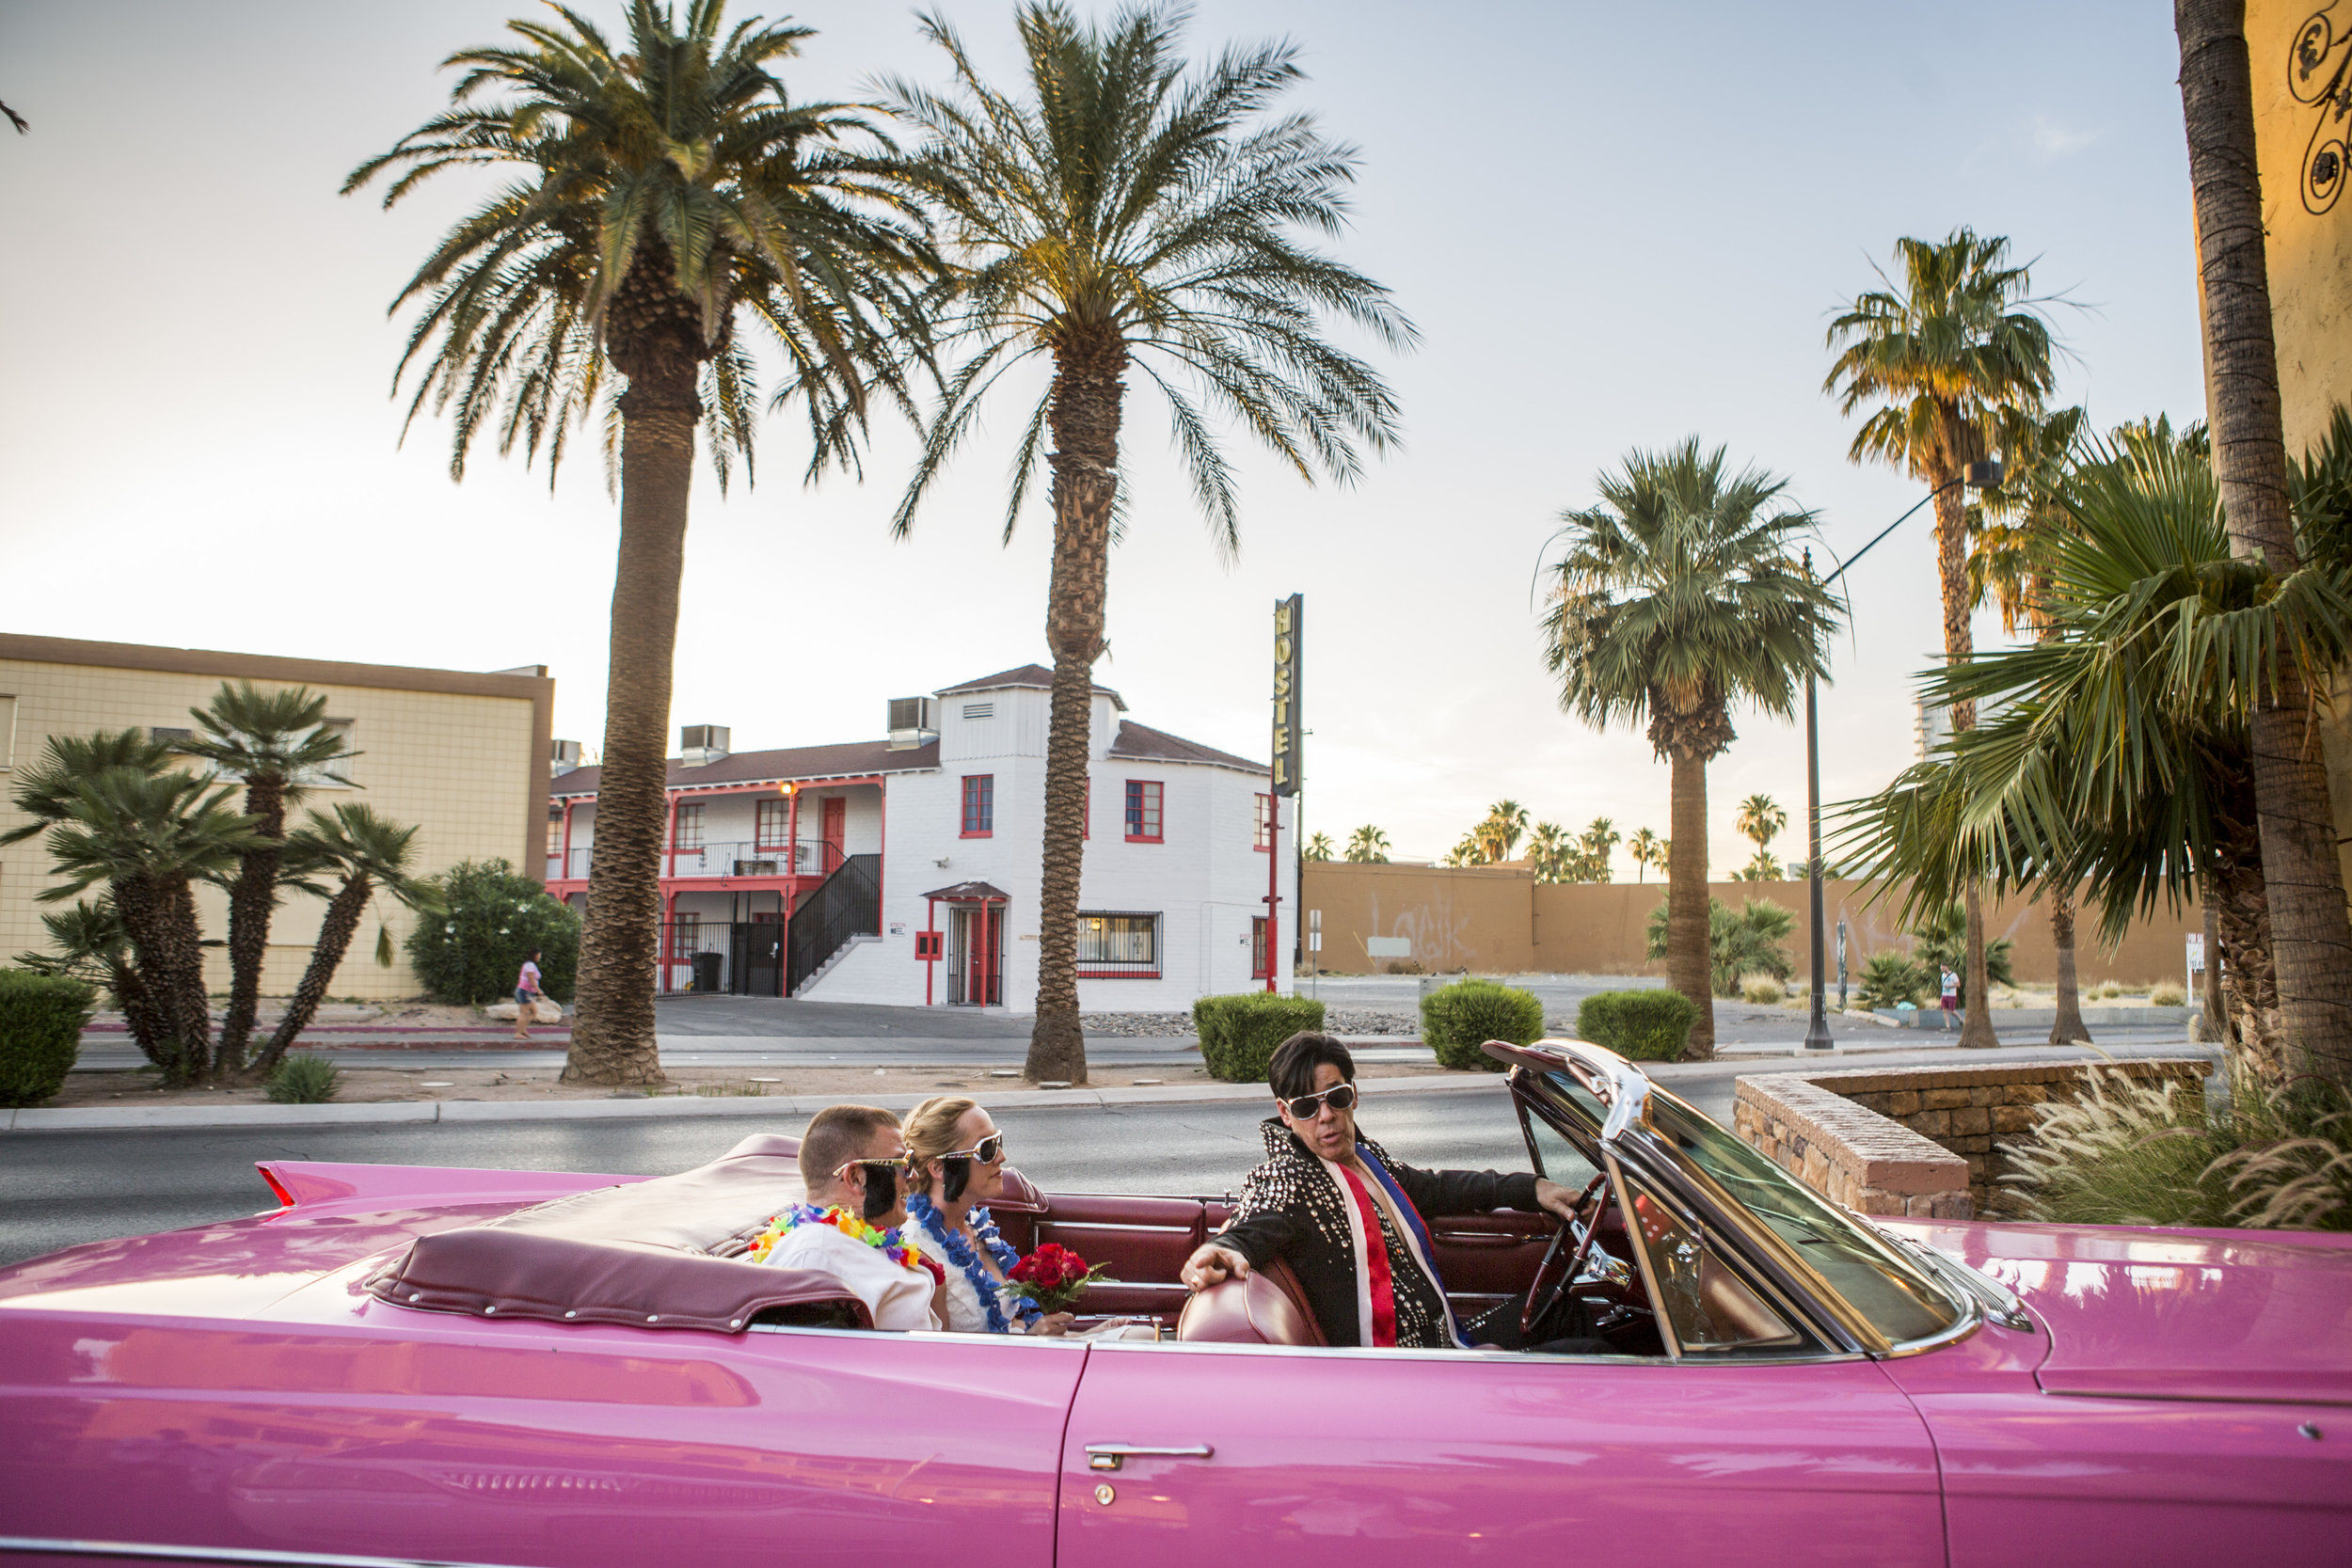  Ron Decar, owner of Viva Las Vegas and dressed as Elvis, drives Missie Berry and Robert Moseley into the chapel to renew their wedding vows at the Viva Las Vegas Wedding Chapel on Saturday, June 3, 2017.  Patrick Connolly Las Vegas Review-Journal @P